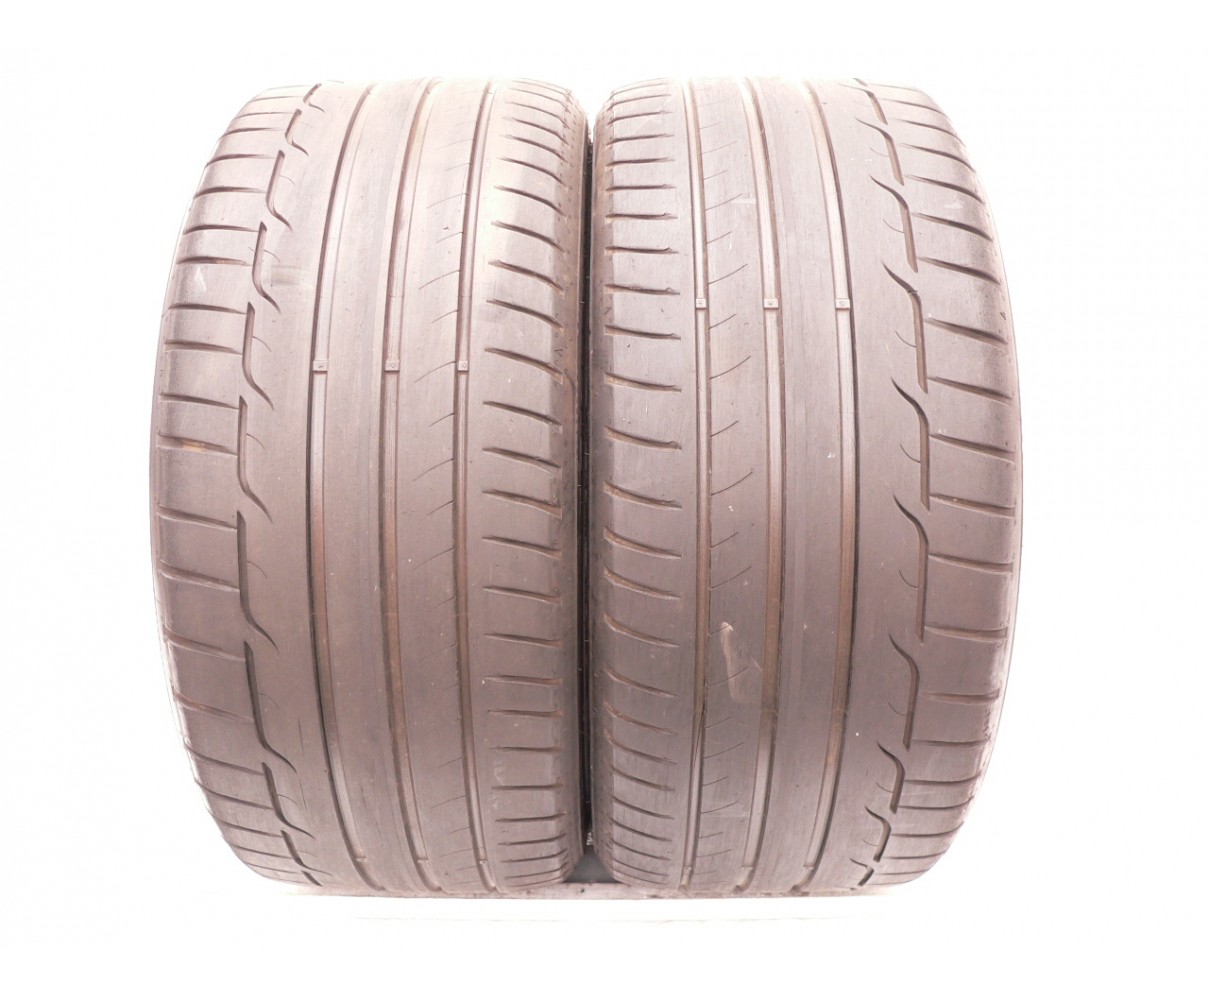 used tires 265 19 Dunlop Sp Sport Maxx 98Y 80%